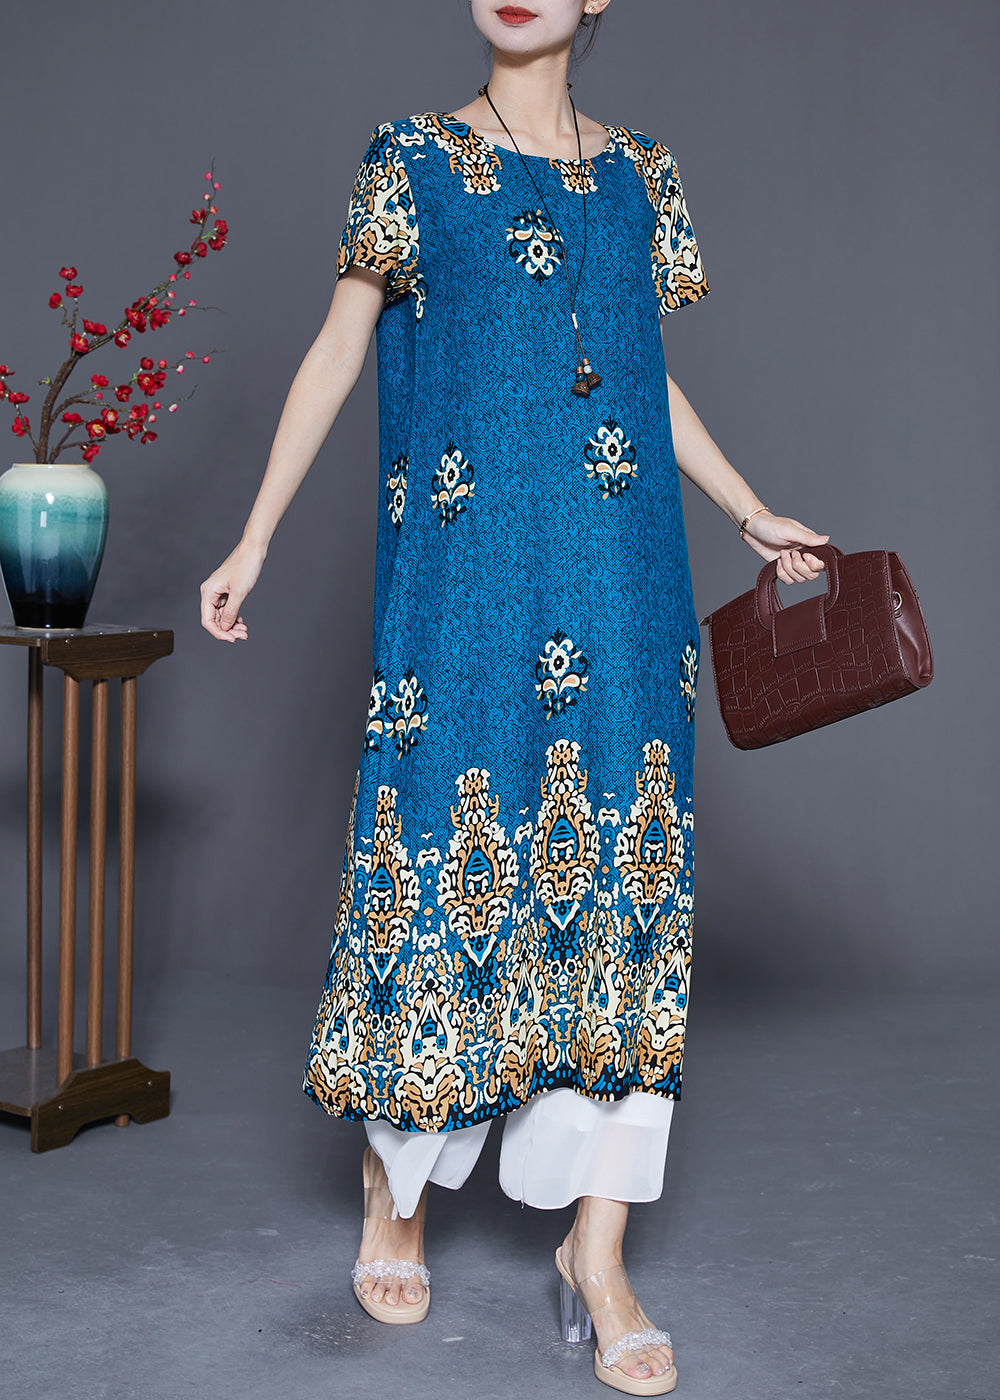 Peacock Blue Print Cotton Party Dress Oversized Summer